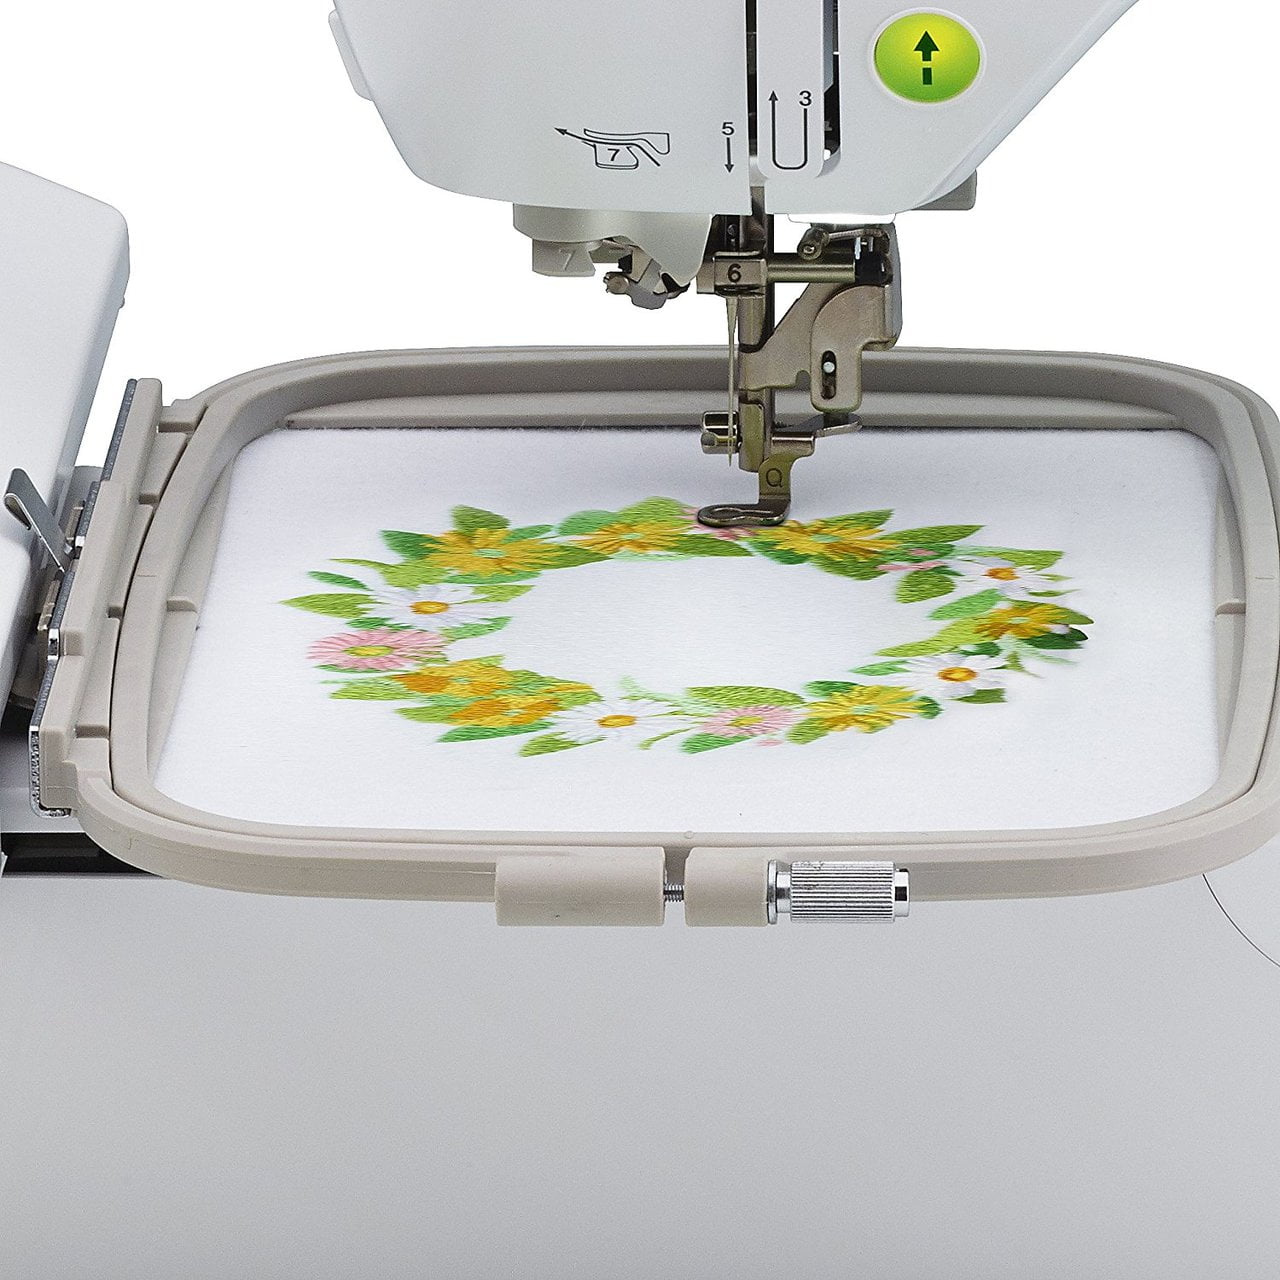 2021 Best Selling Brother Se1900 Sewing And Embroidery Machine $250 -  Wholesale Finland Embroidery Machines at factory prices from SHS  International LLC